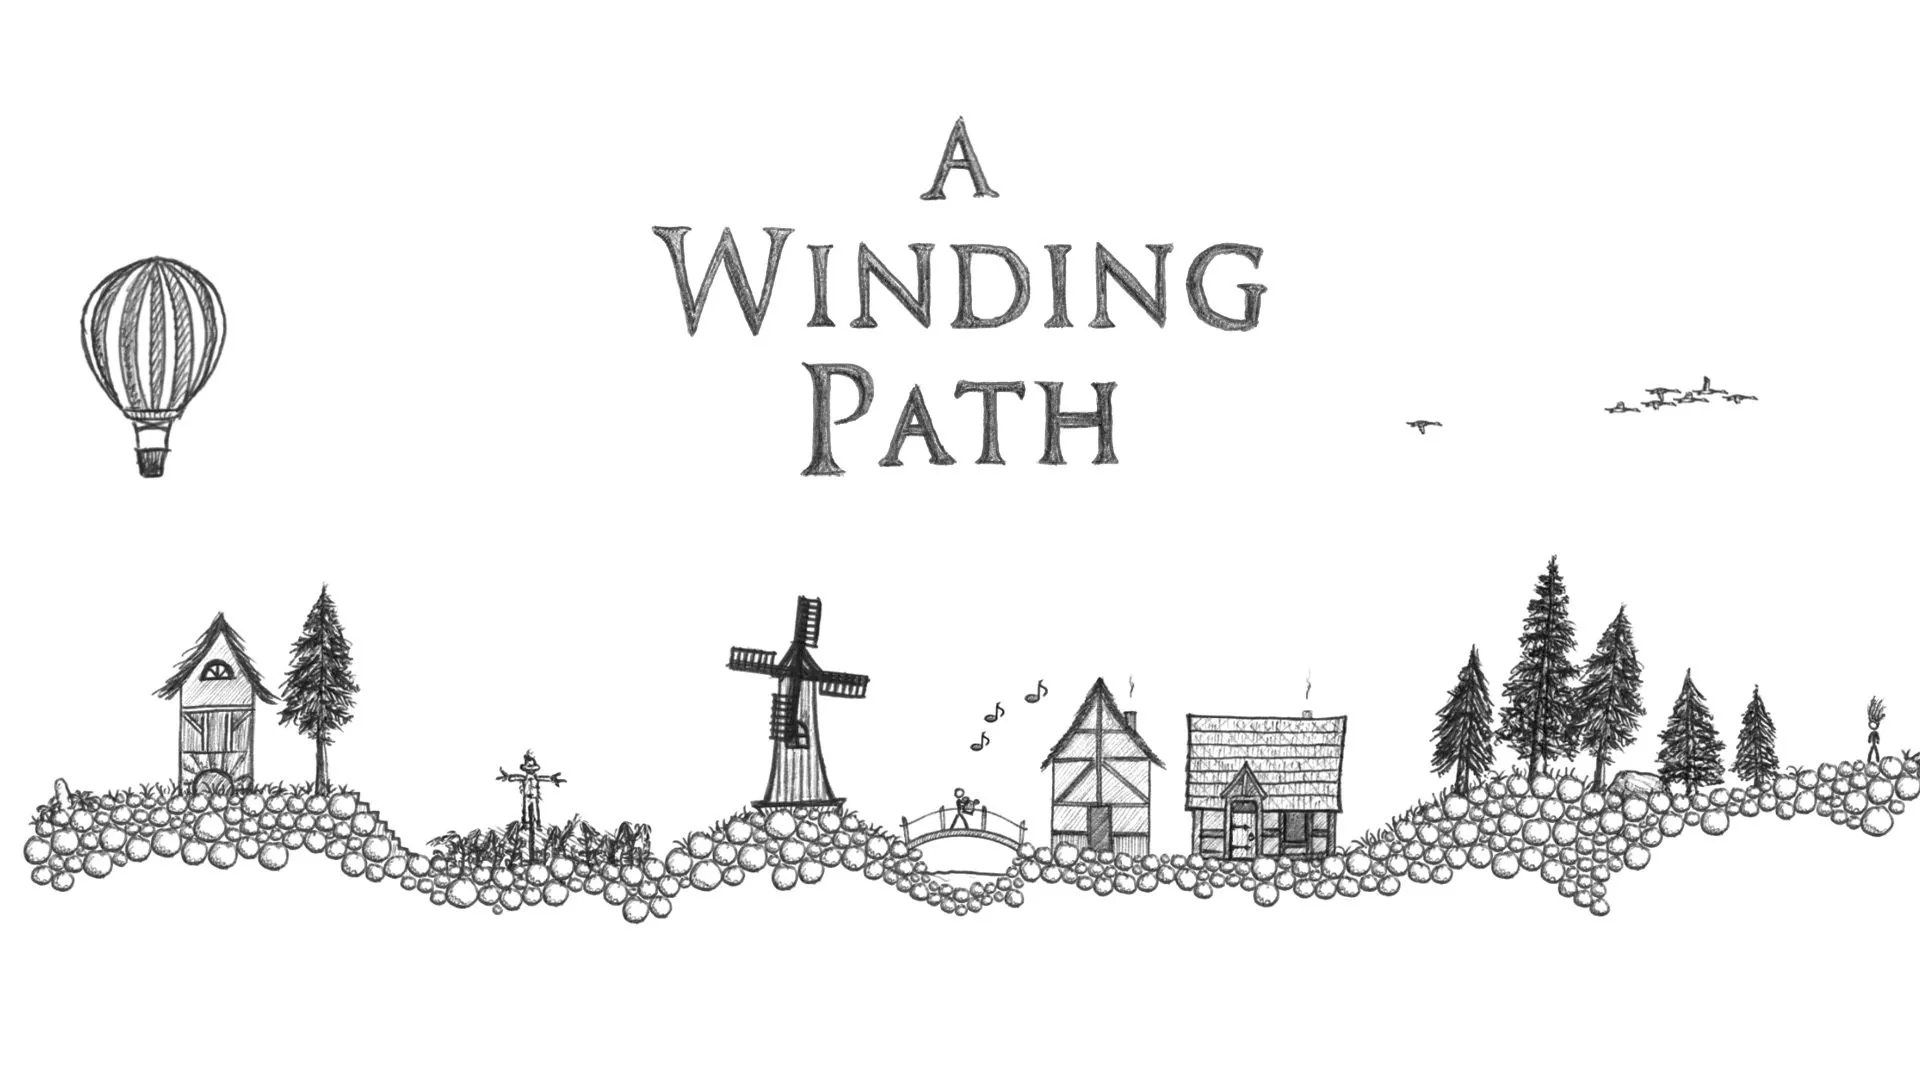 A Winding Path is a hand-drawn adventure game coming to Nintendo Switch